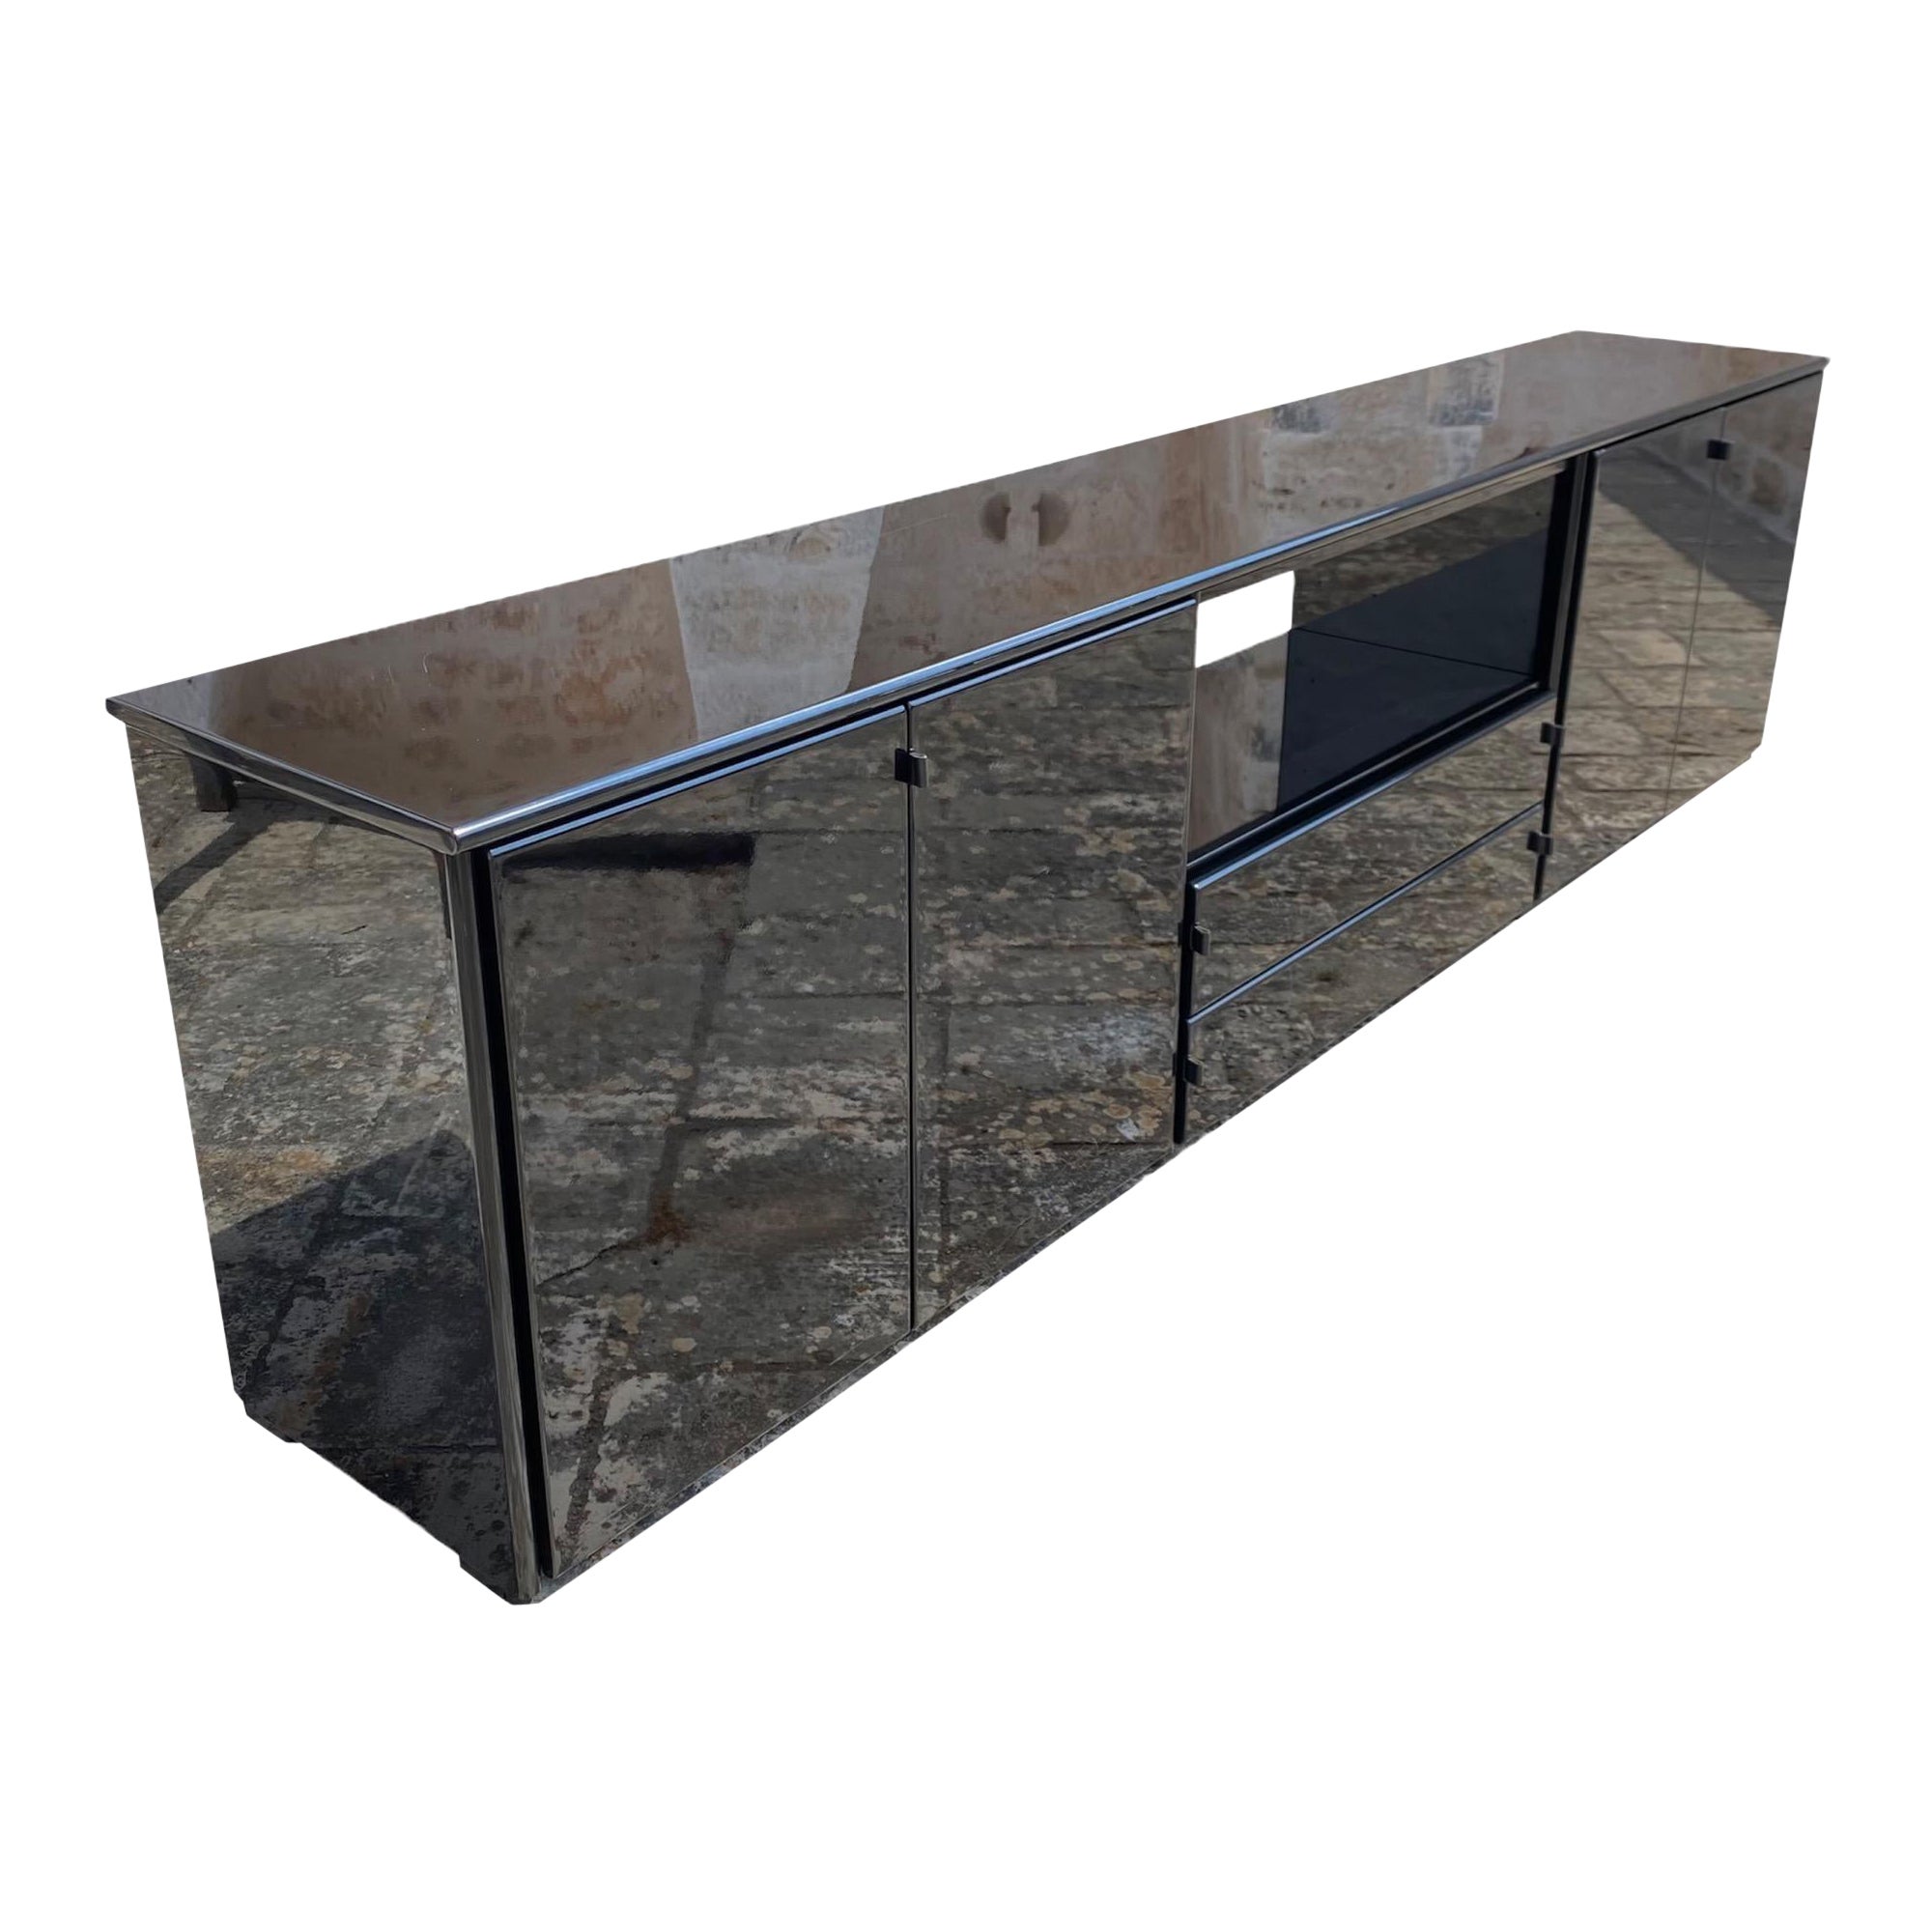 "Mount" Sideboard by Afra and Tobia Scarpa for Molteni For Sale